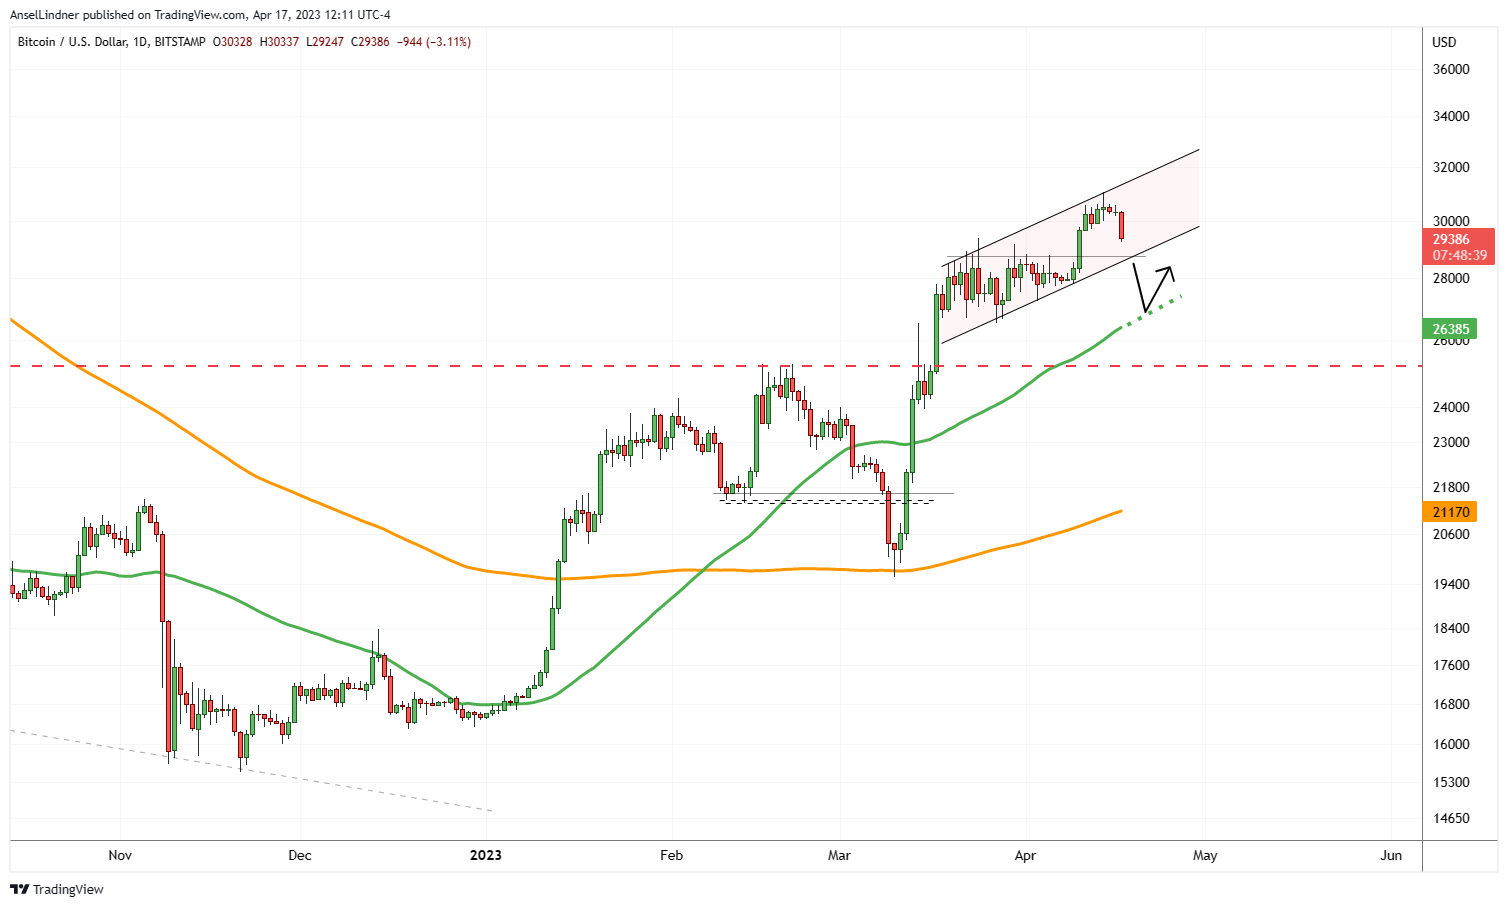 Bitcoin daily chart with 50 and 200 DMA